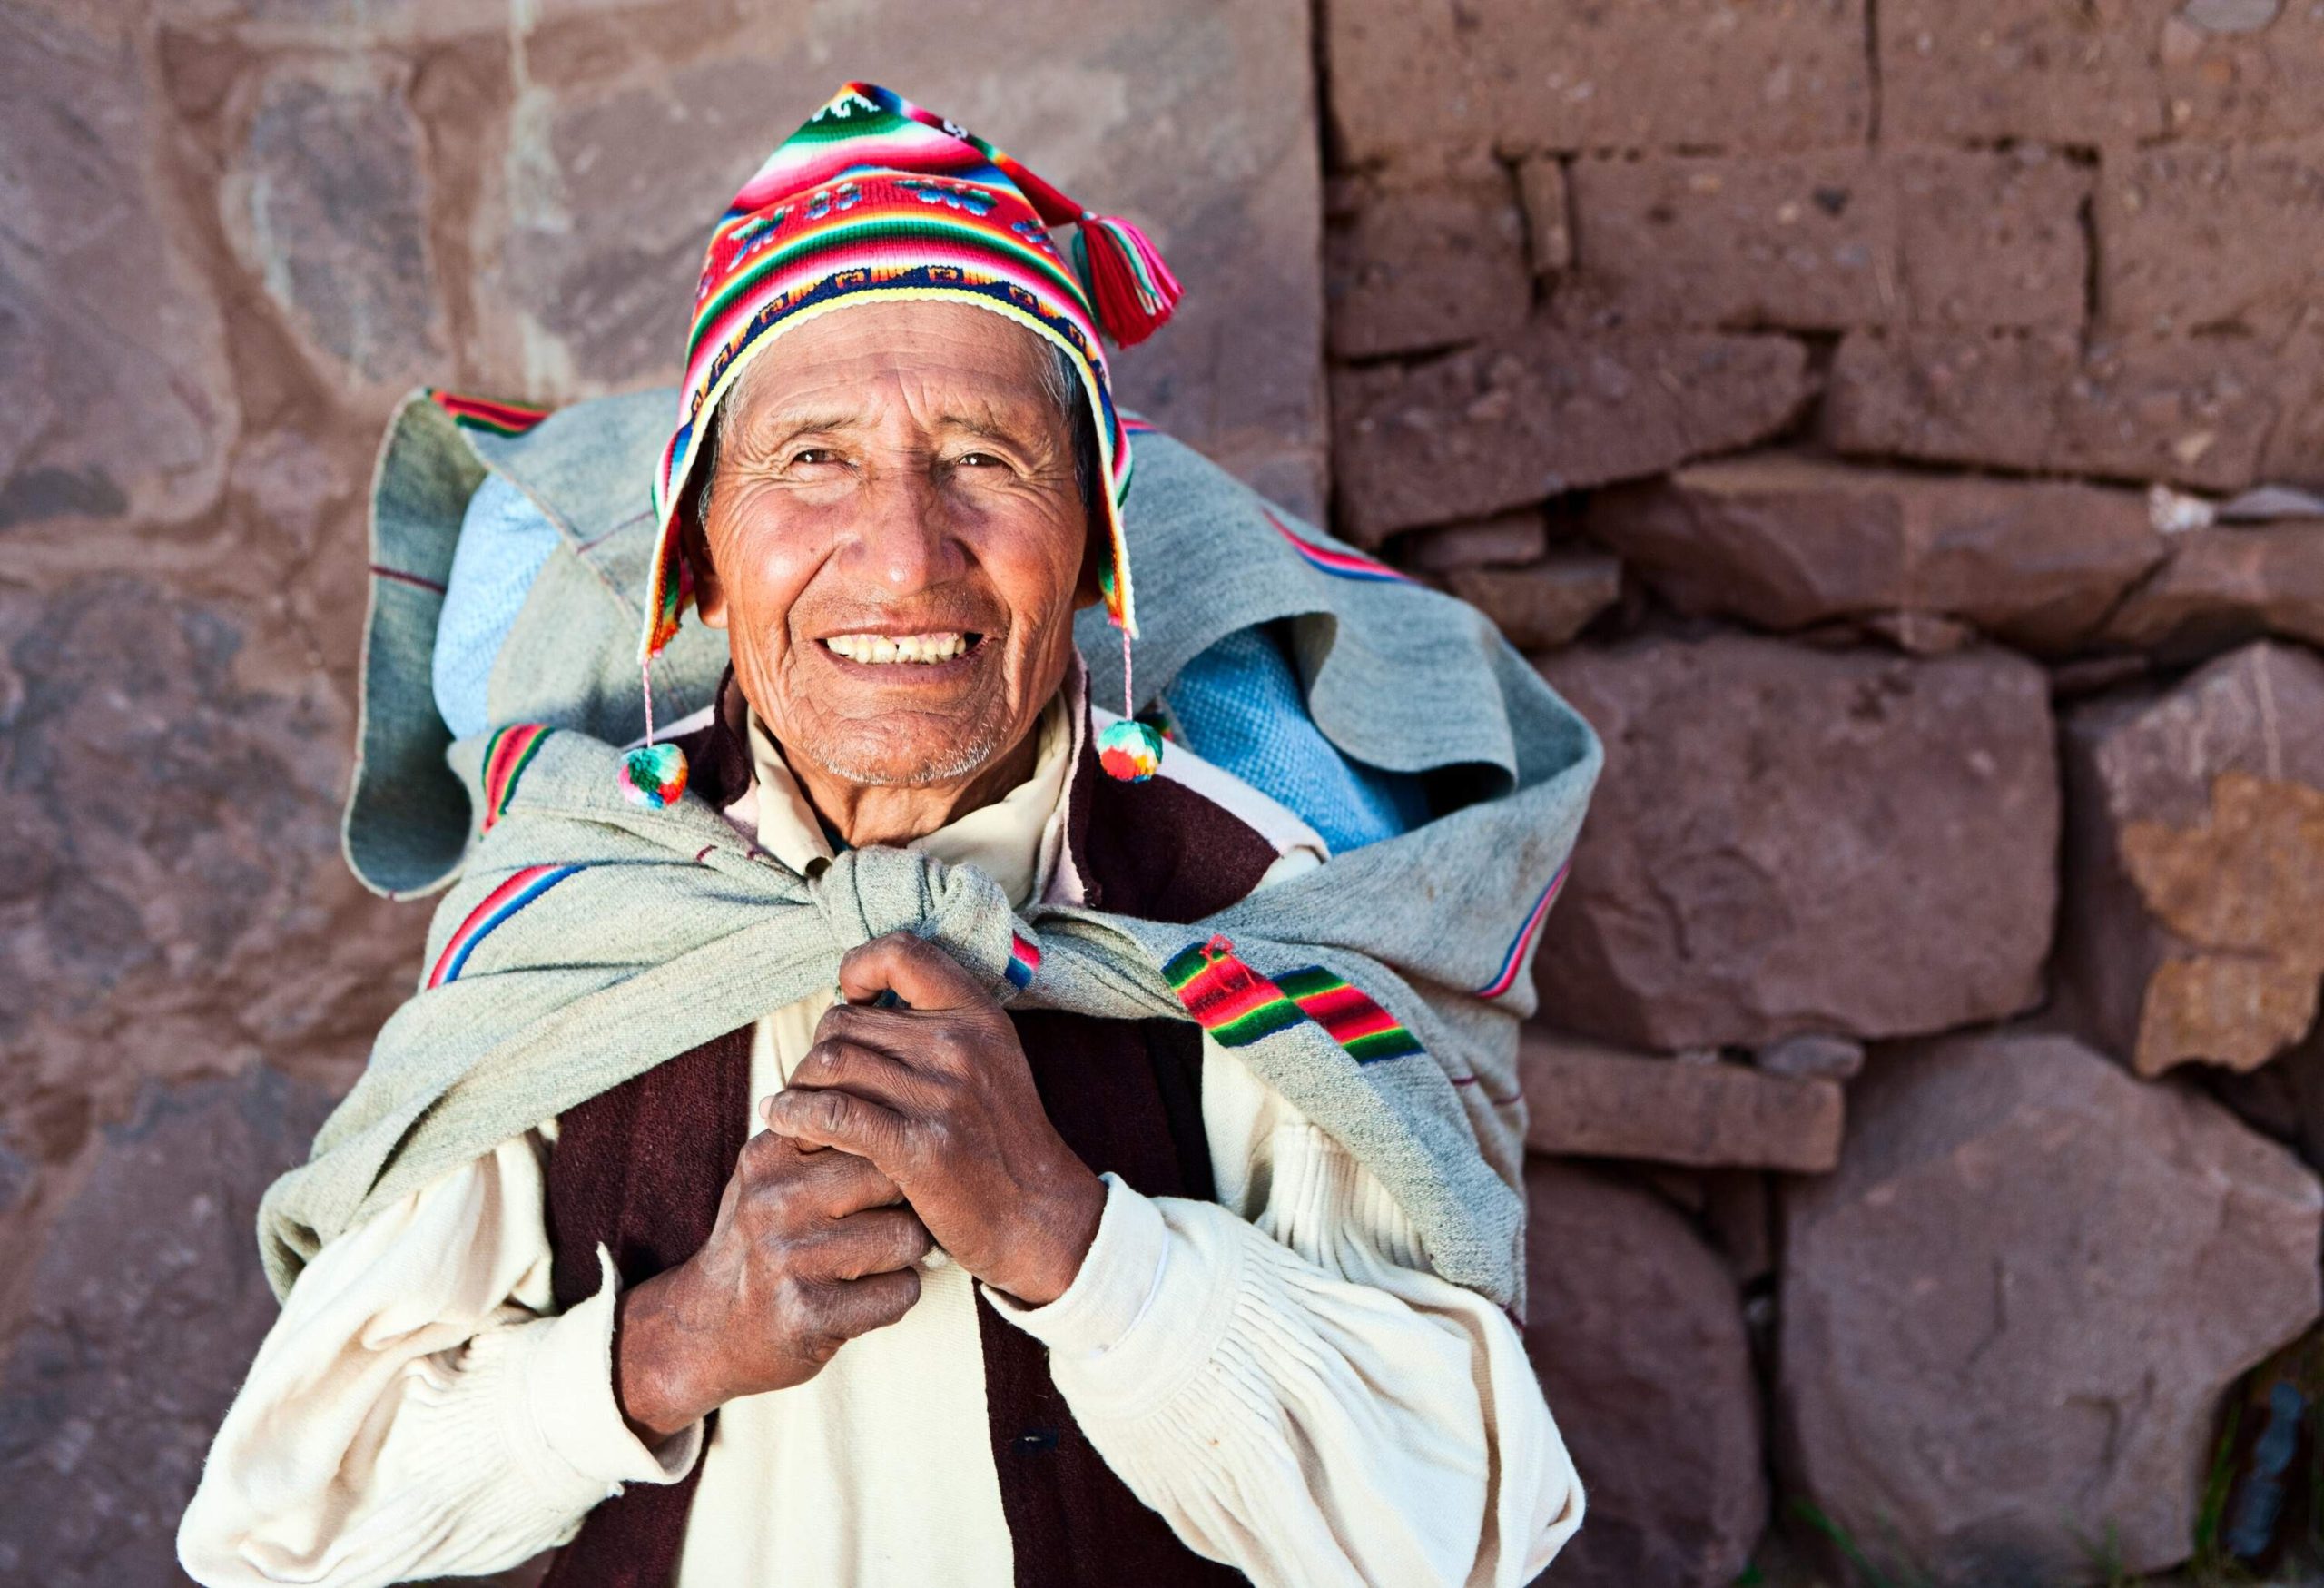 A cheerful old man wearing a vibrant knitted cap and jacket, along with a sack bag, beams with a warm smile.